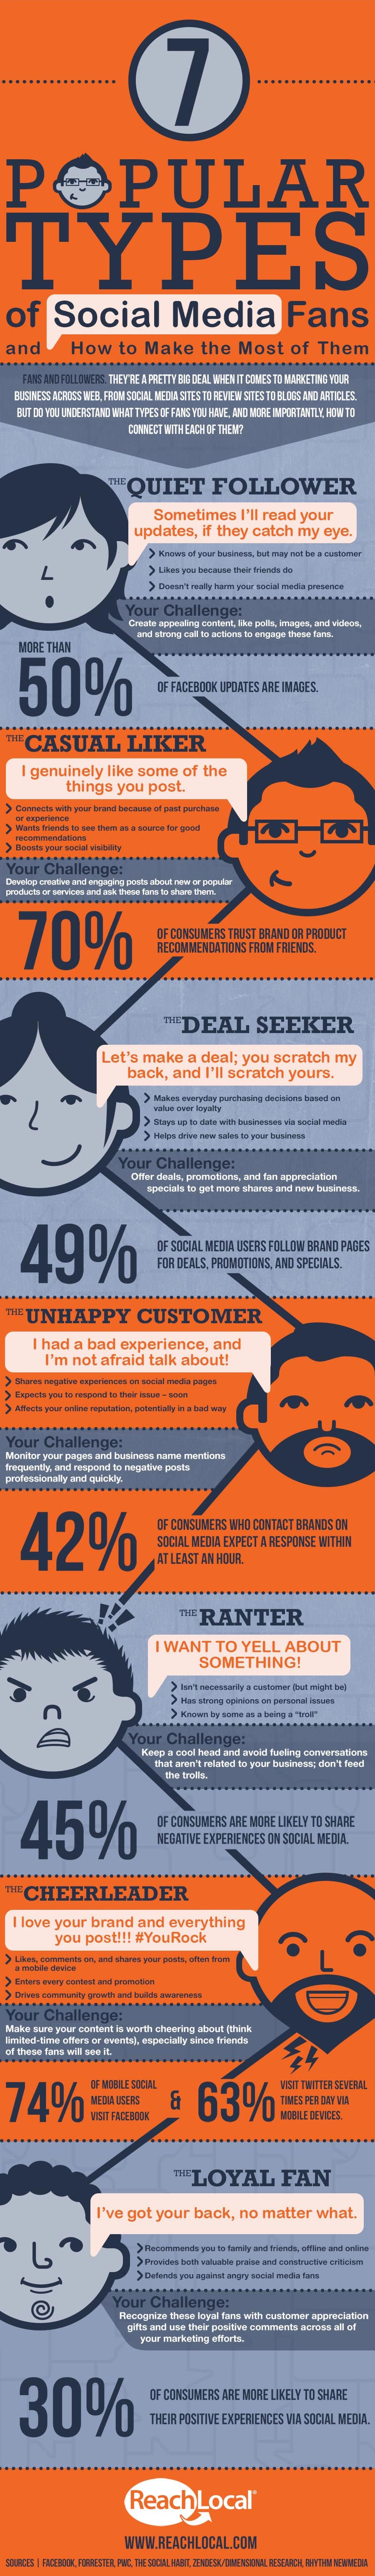 7 Types Of Social Media Fans And Followers Of Brands [Infographic]